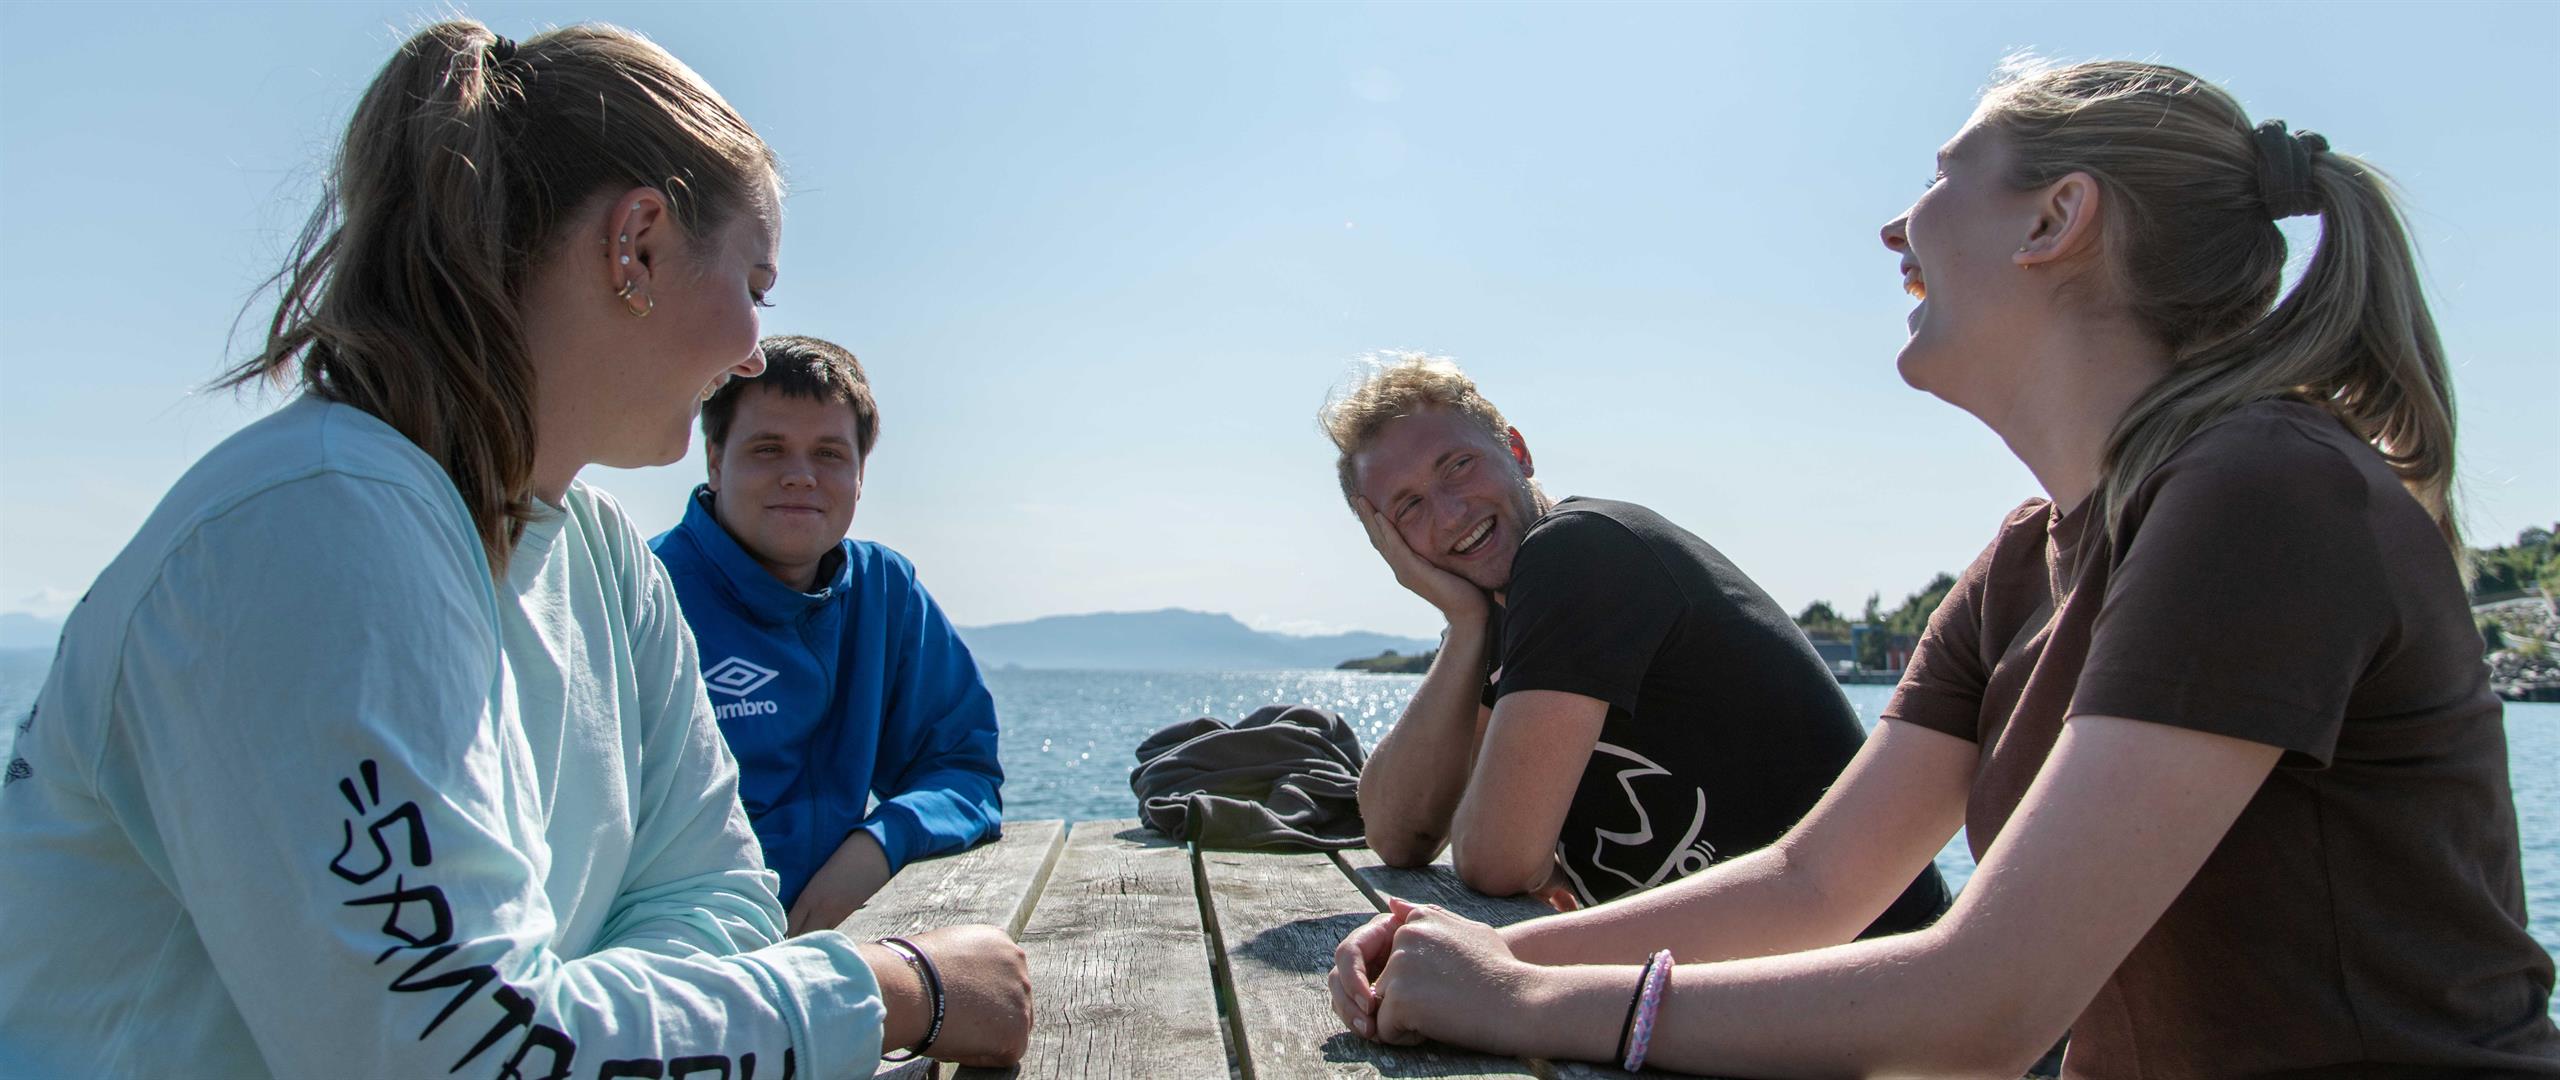 Four young people at a table by the sea.